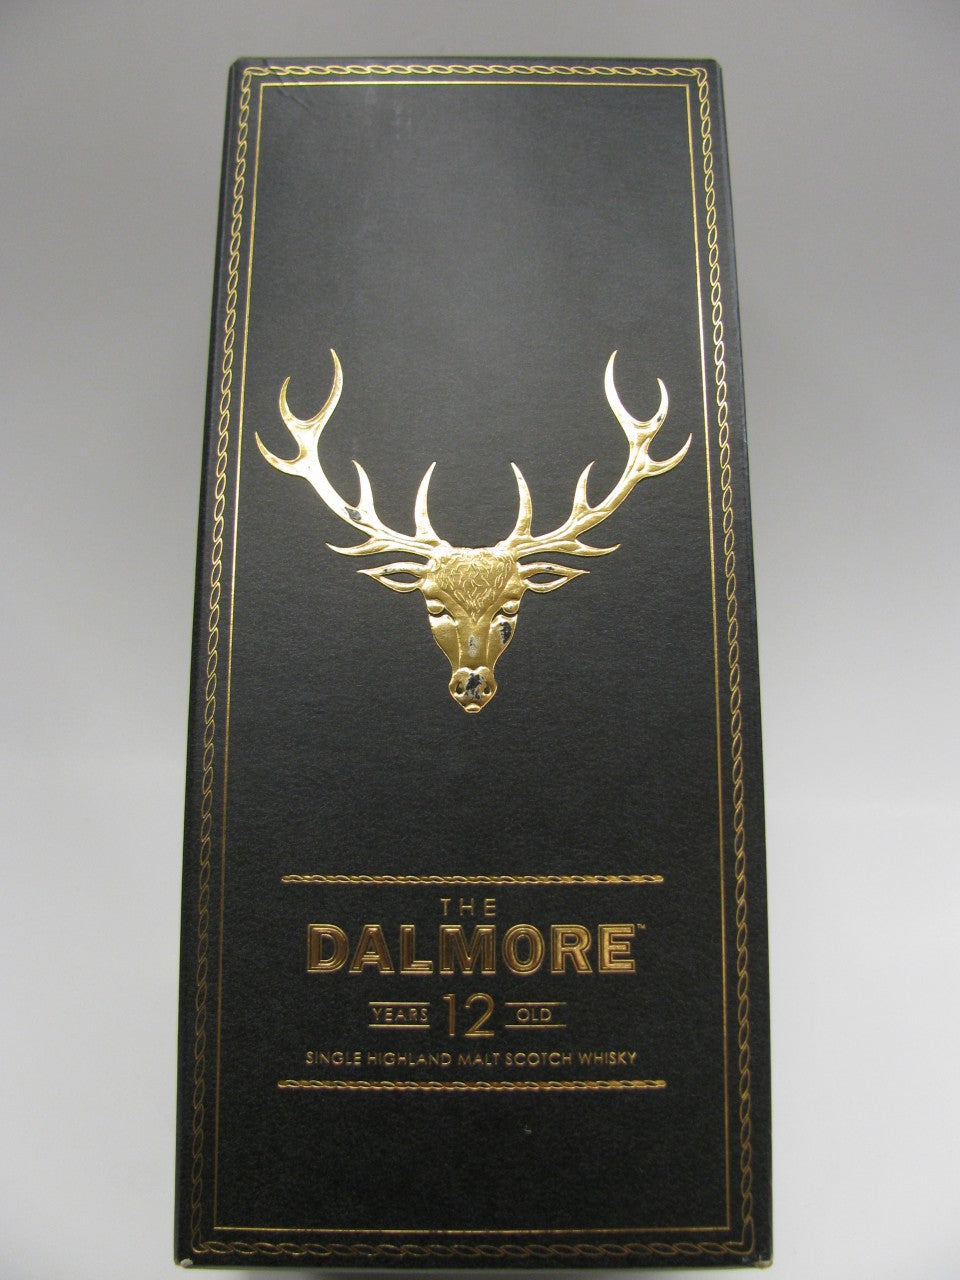 Dalmore 12 Year Scotch Whisky - The Dalmore